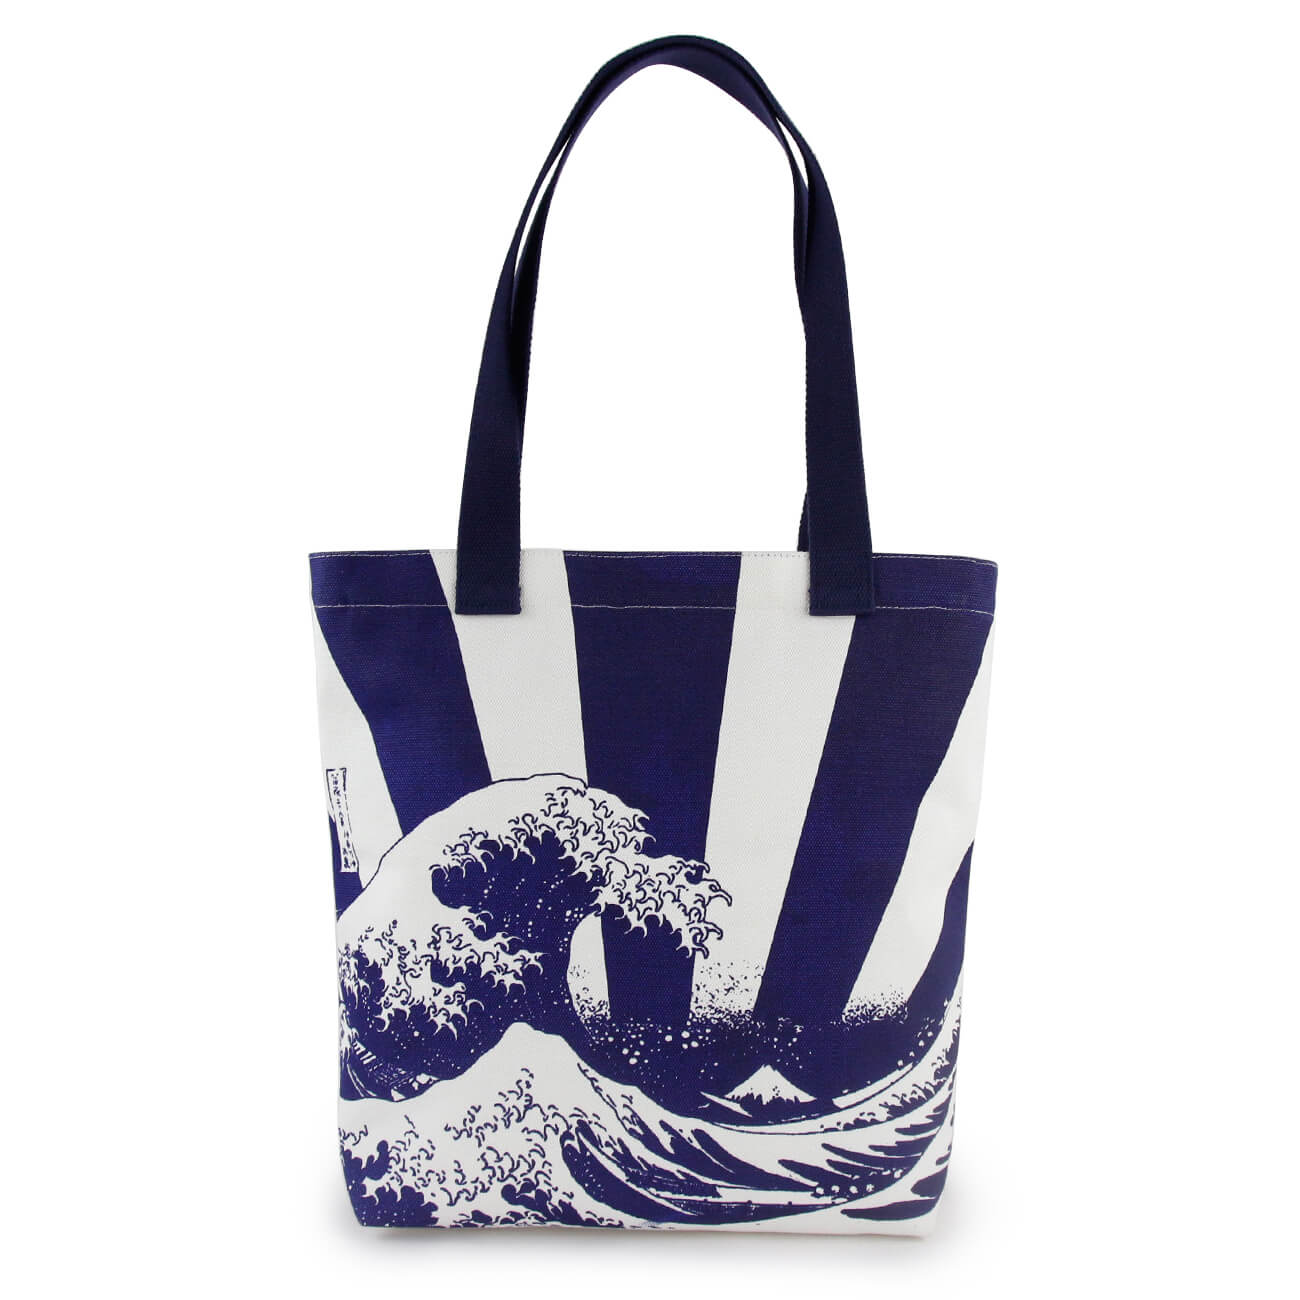 Customized Tote Handbags and Custom Grocery Bags